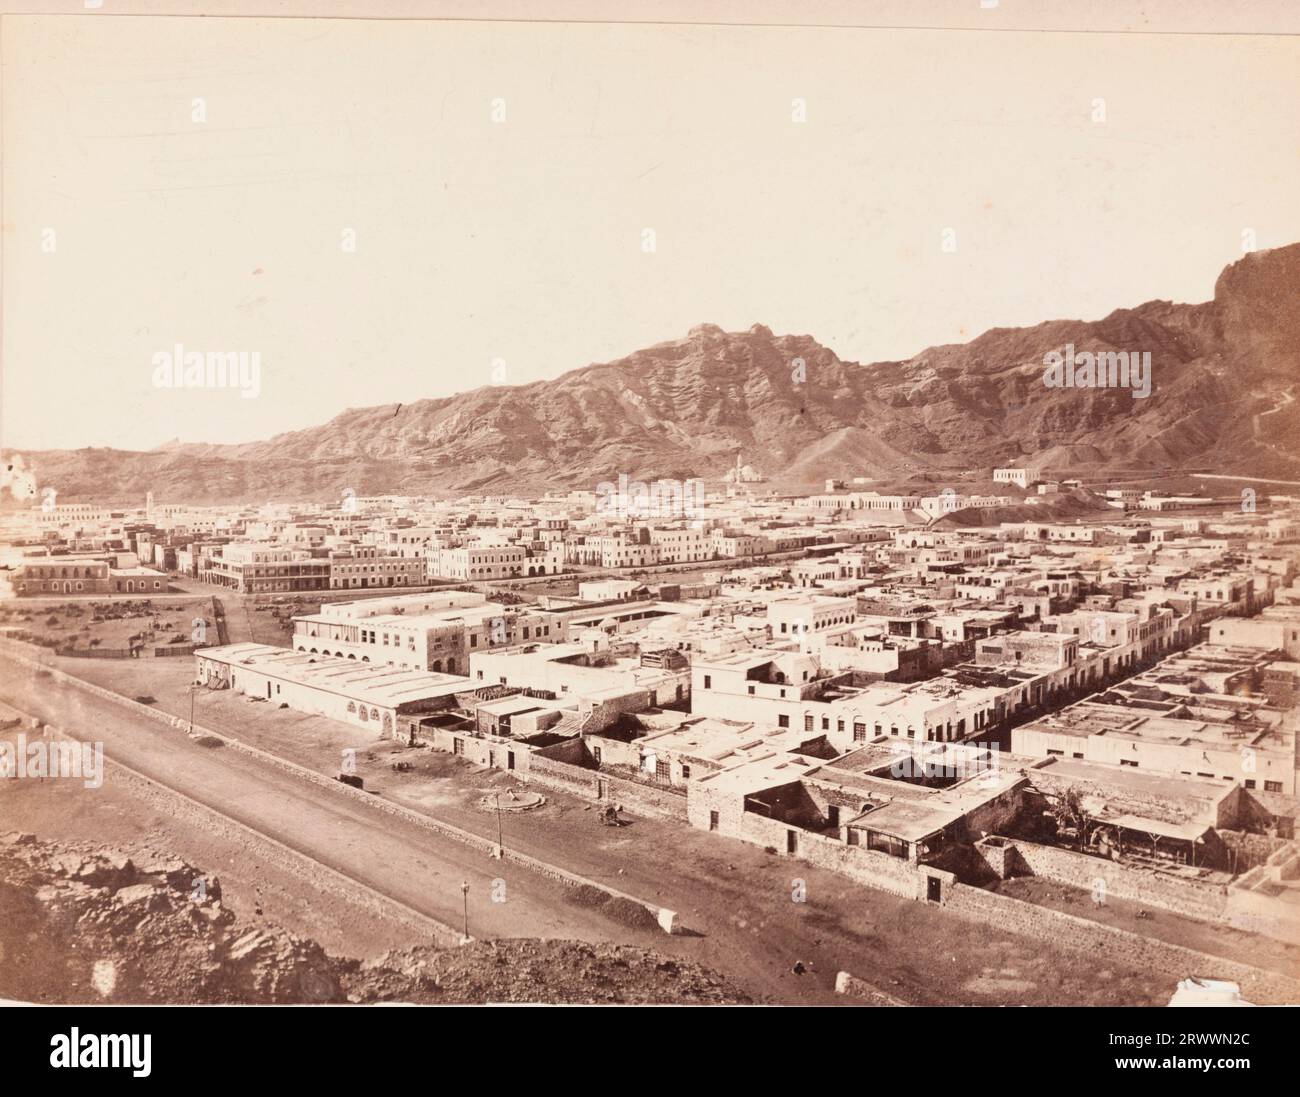 View of Aden, taken from a high vantage point with rocky mountains in the background. The buildings within the city are laid out in a grid-like formation with a fenced strip of land where animals are grazing. Caption reads: Aden. Stock Photo